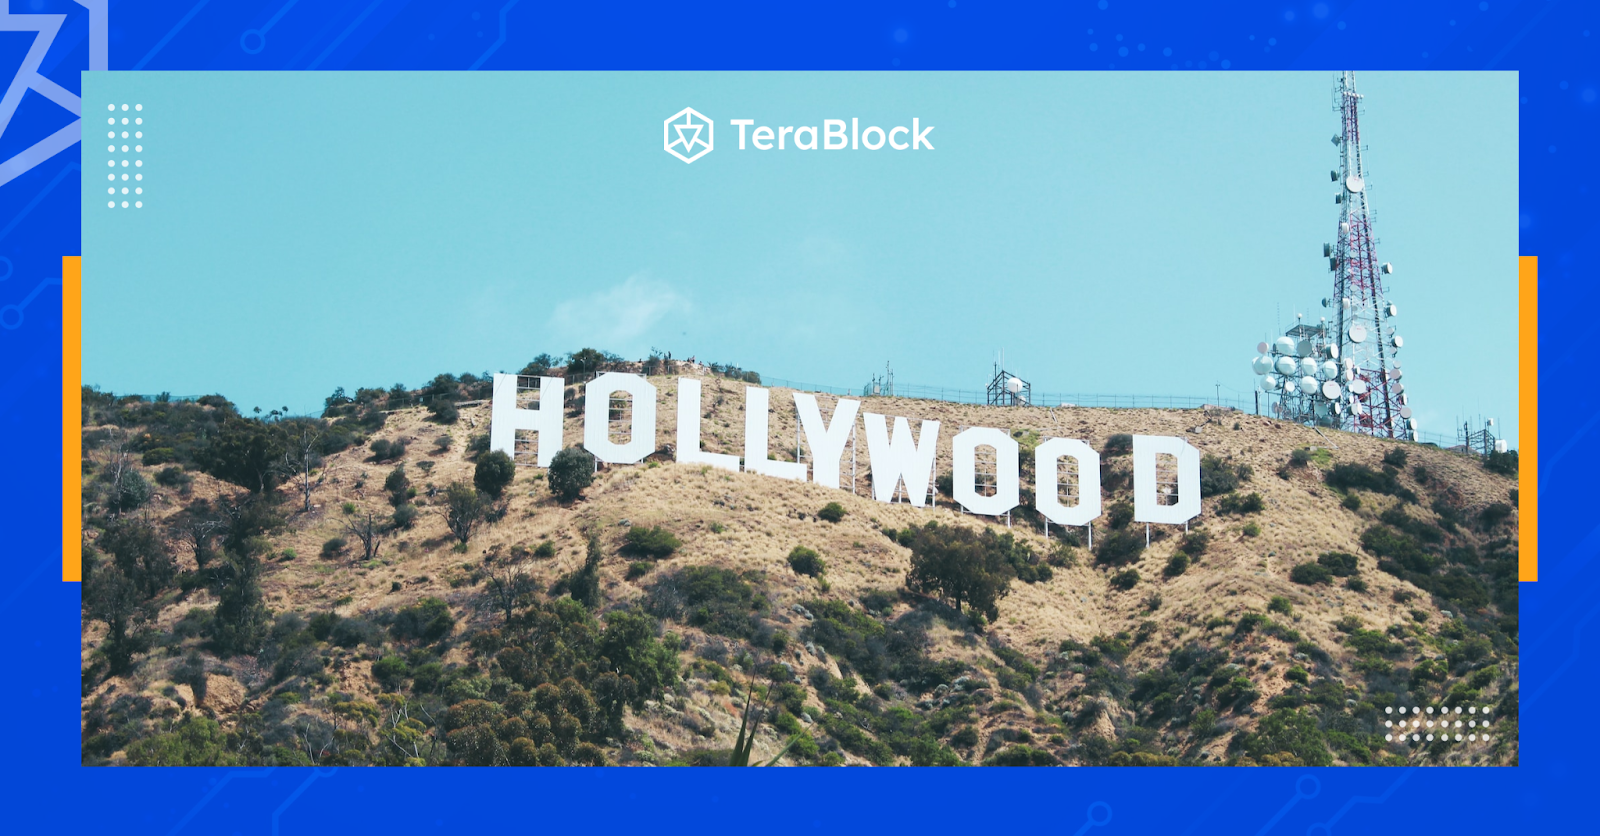 Hollywood sets foot into web3 as StoryCo raises $6 million to decentralise storytelling